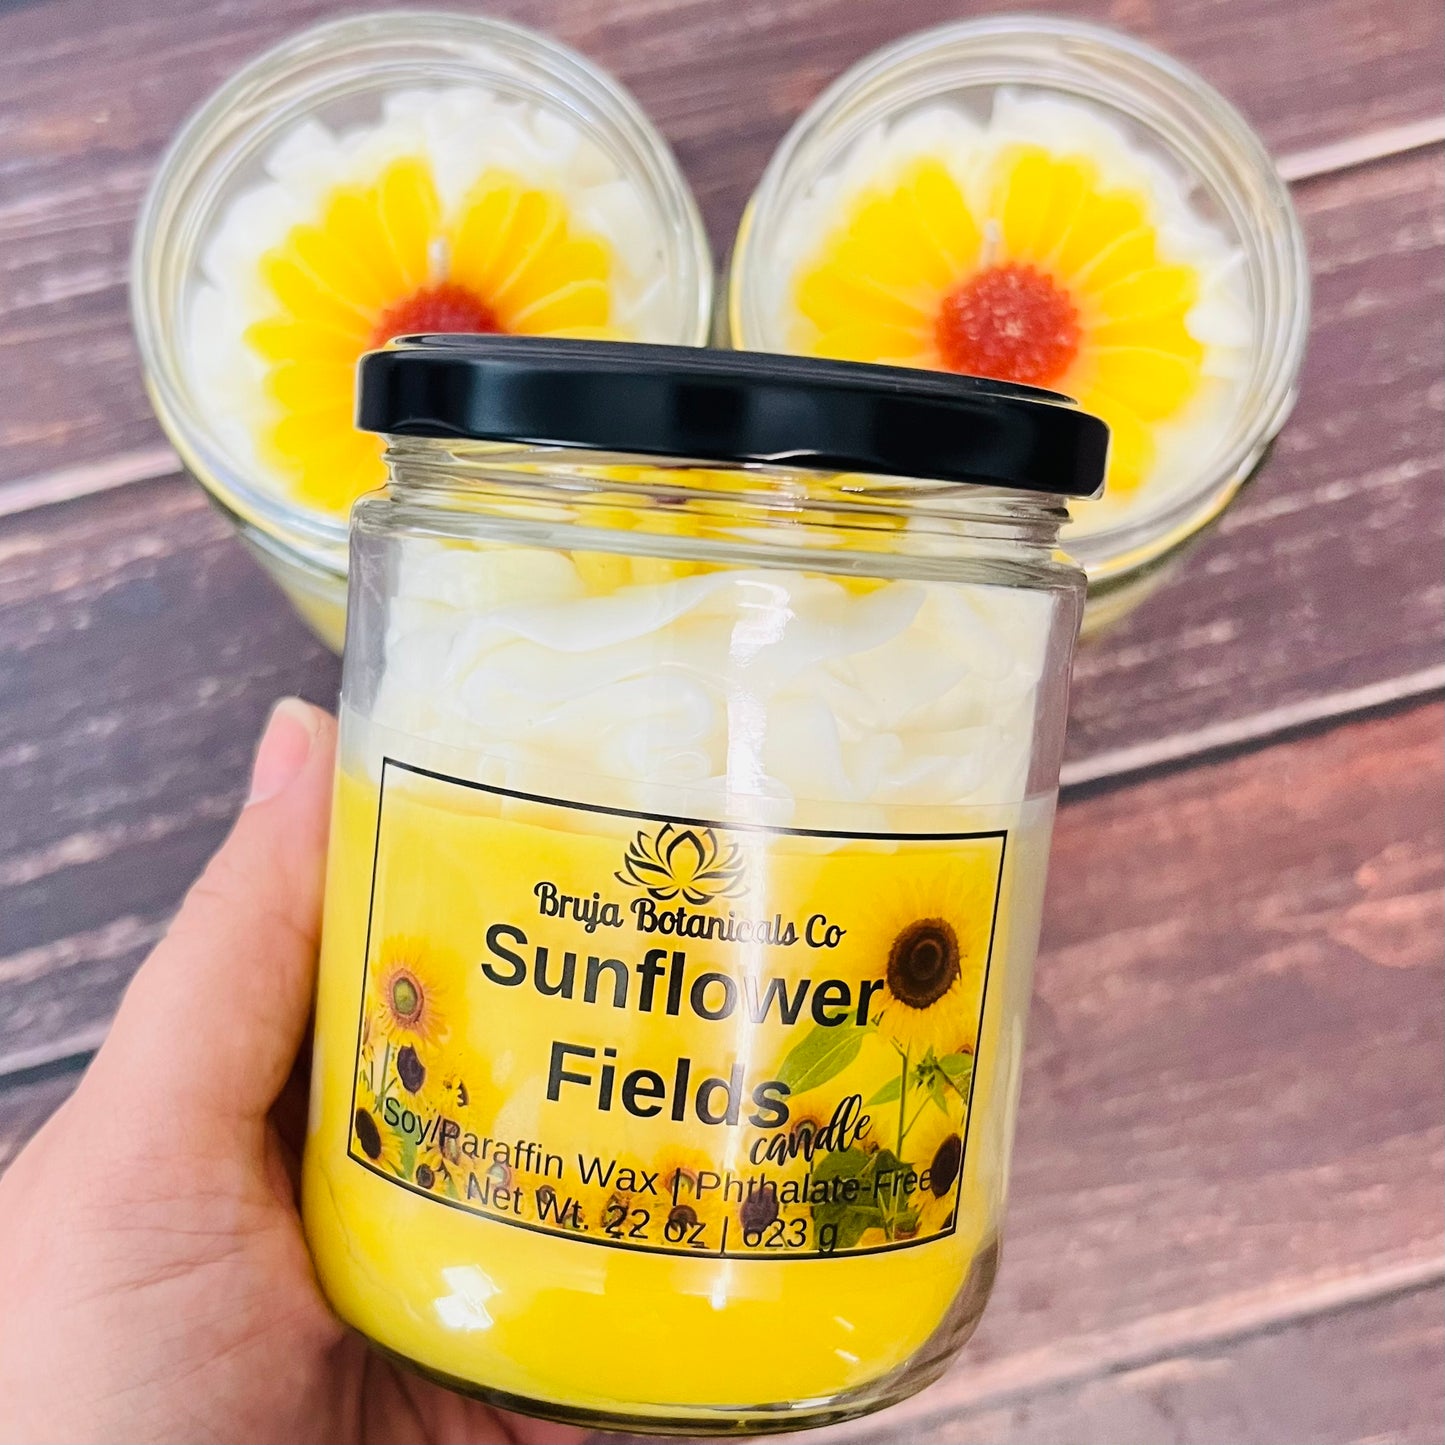 Sunflower Fields Whipped Candle